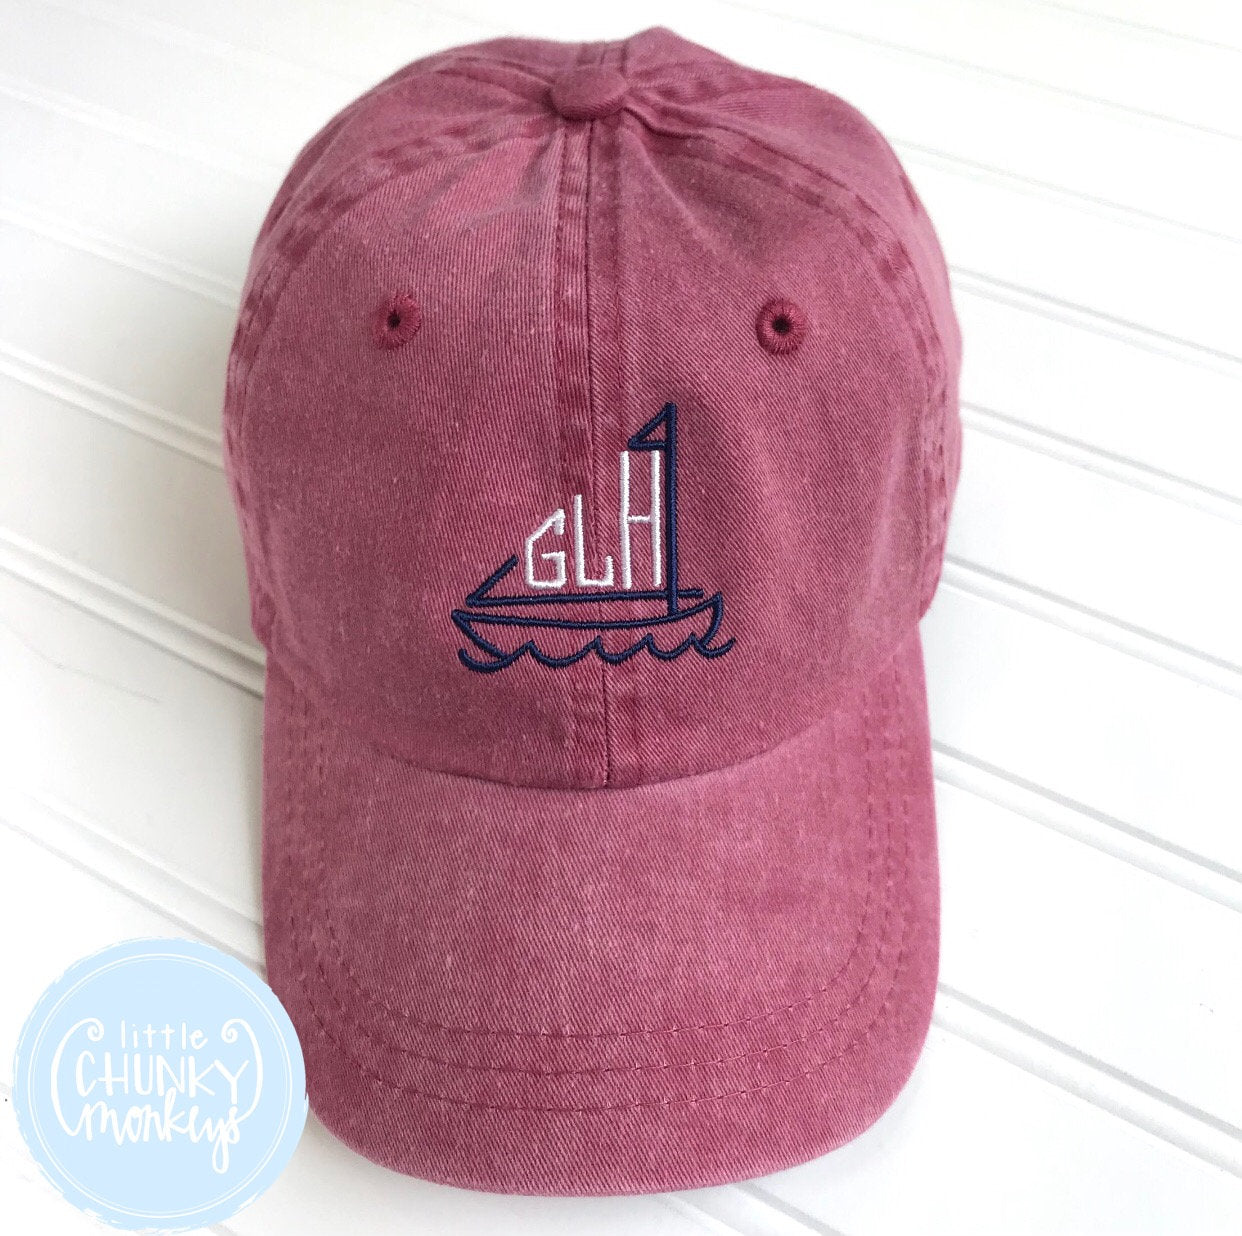 Toddler Kid Hat - Faded Red with Sailboat Monogram